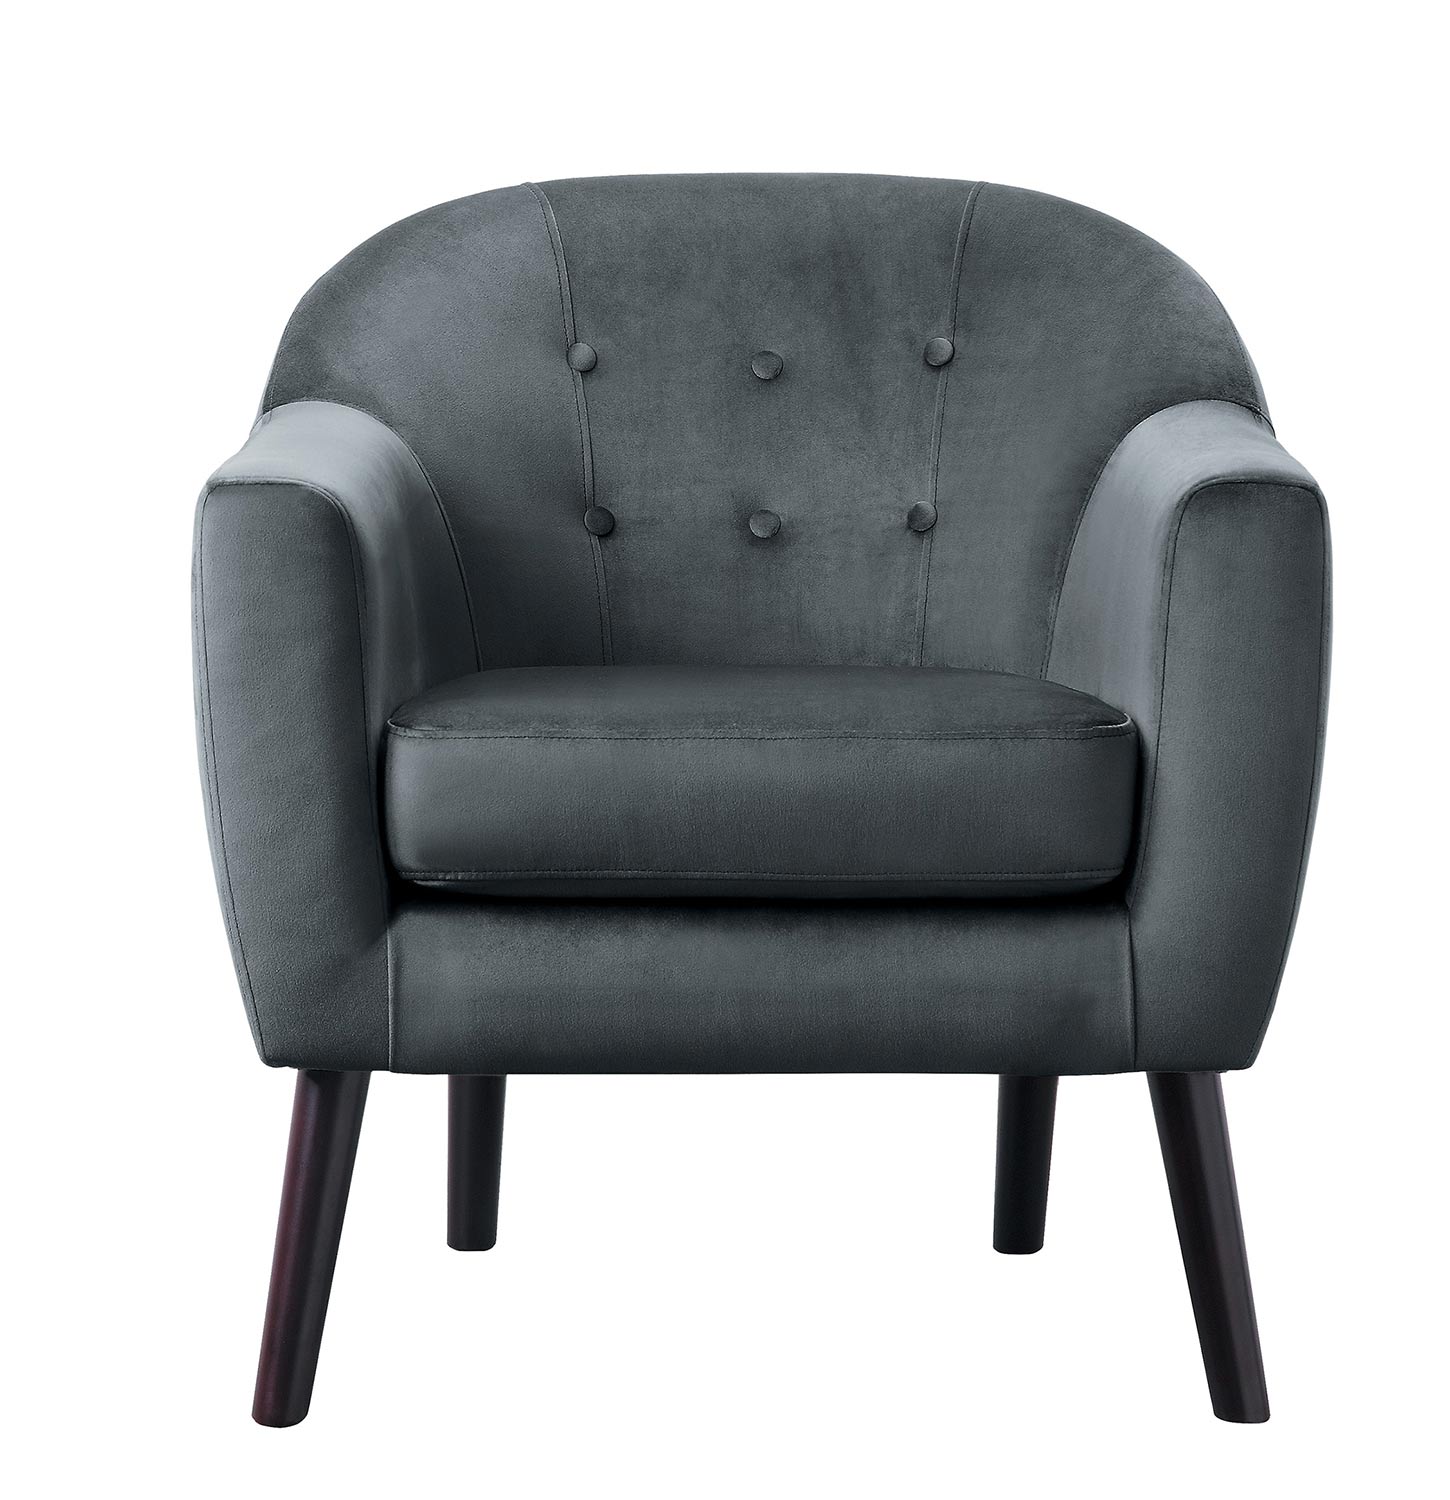 Homelegance Quill Accent Chair - Gray